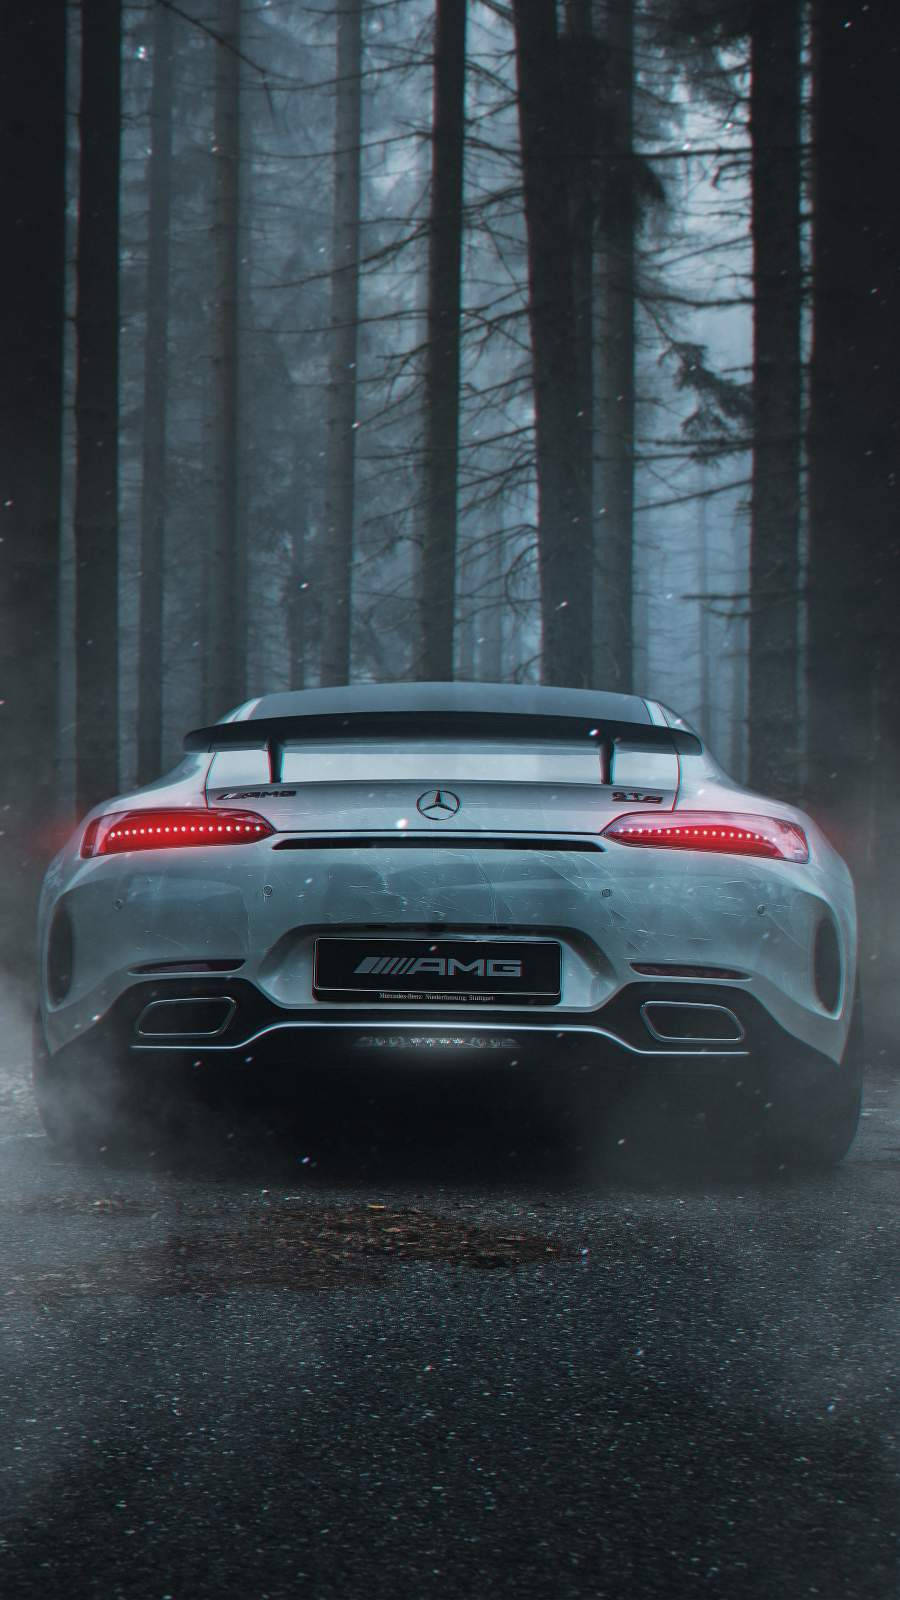 Mercedes-amg Misty Forest Iphone Wallpaper